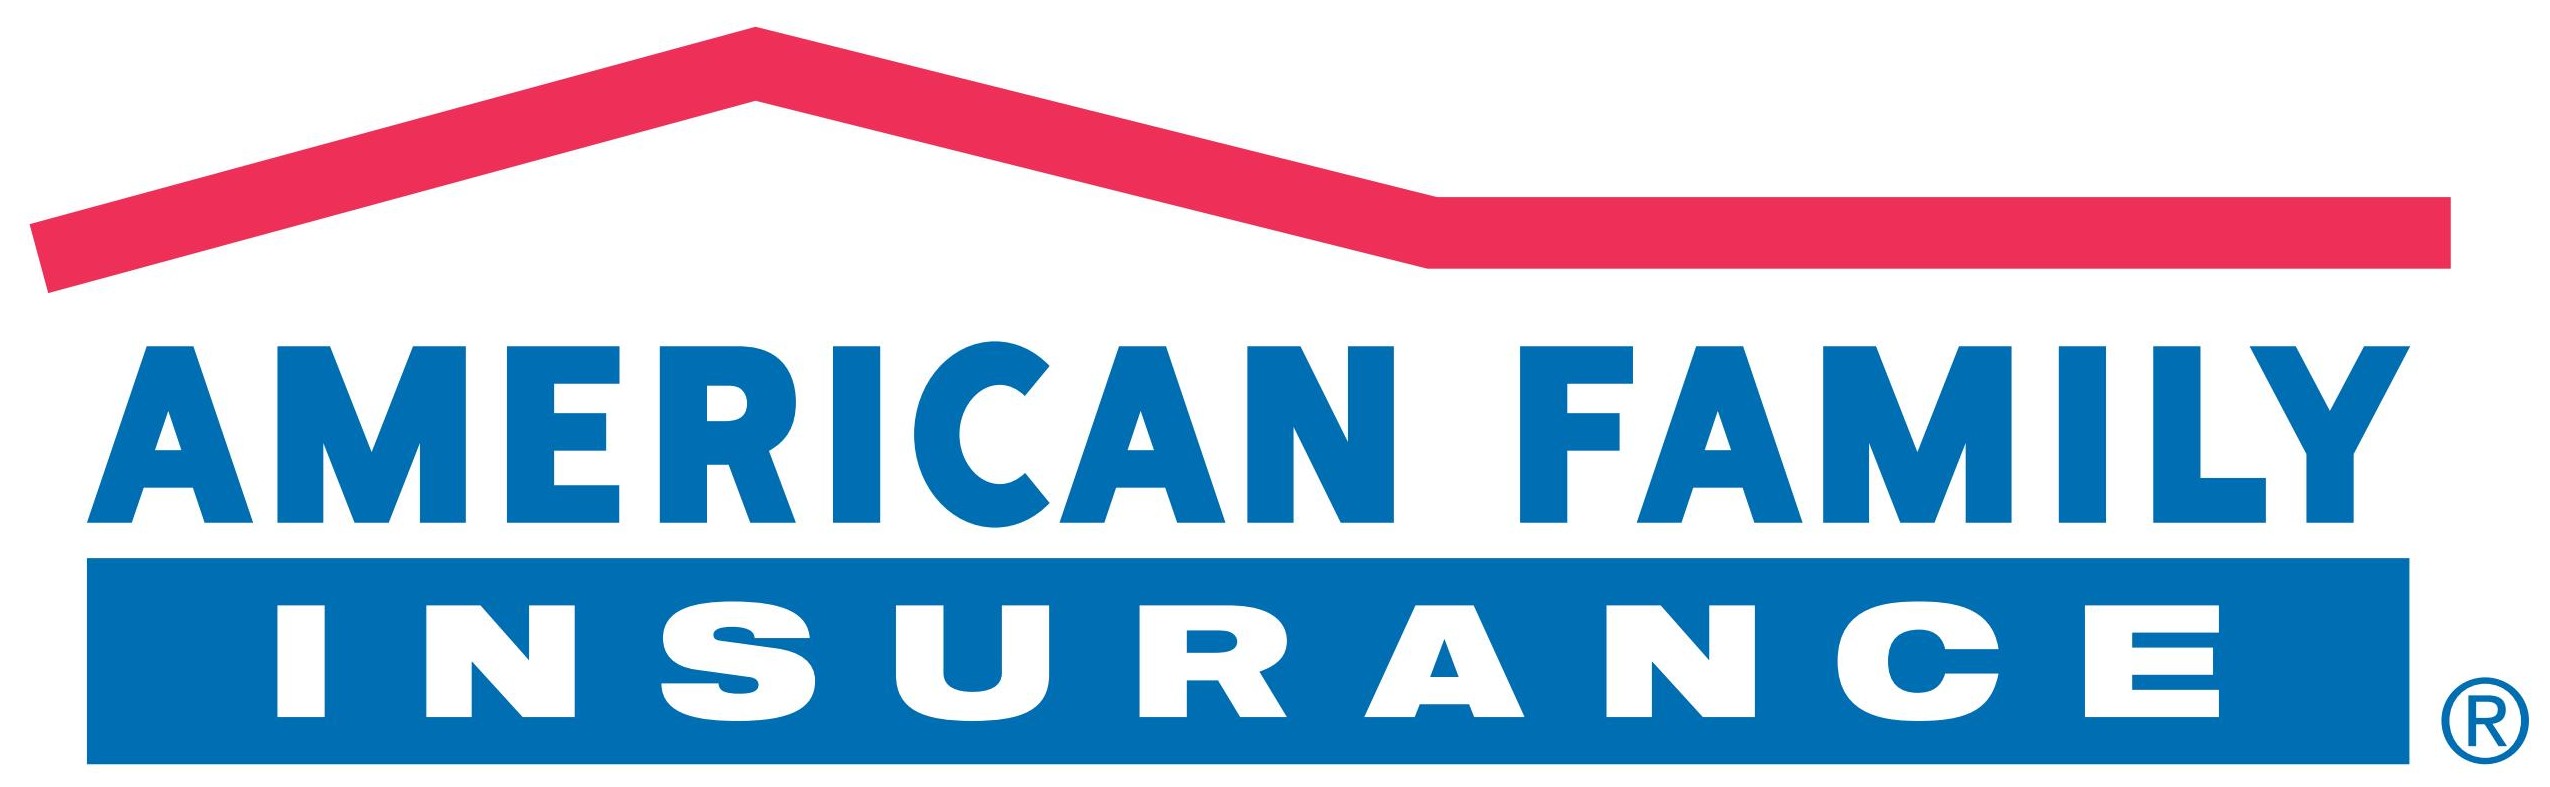 Sponsorpitch & American Family Insurance